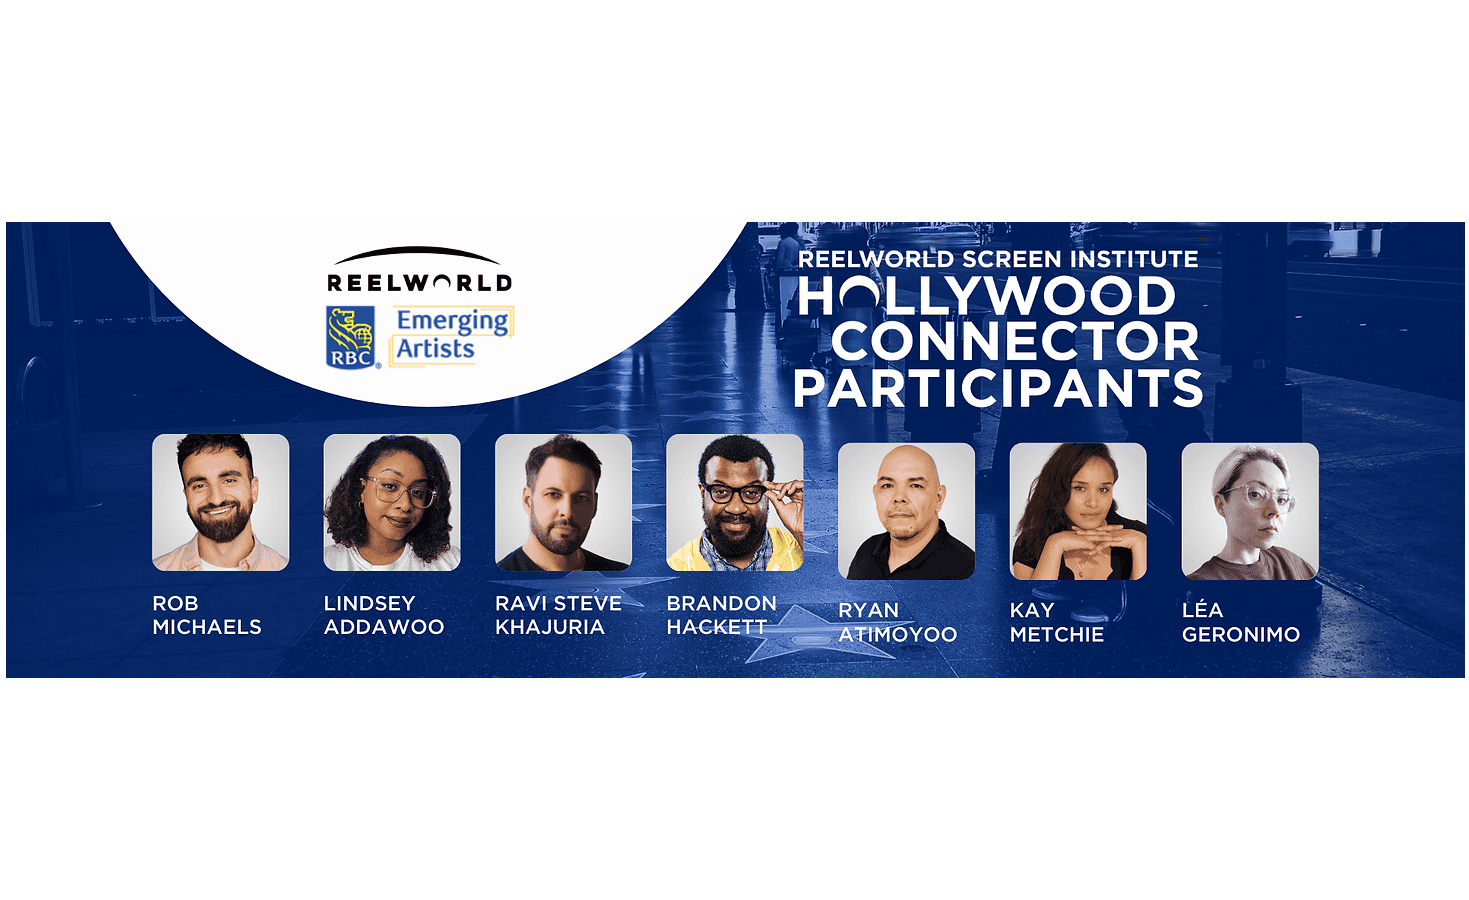 SSL Grads Ryan Atimoyoo & Kay Shioma Metchie participate in Reel World Hollywood Connector